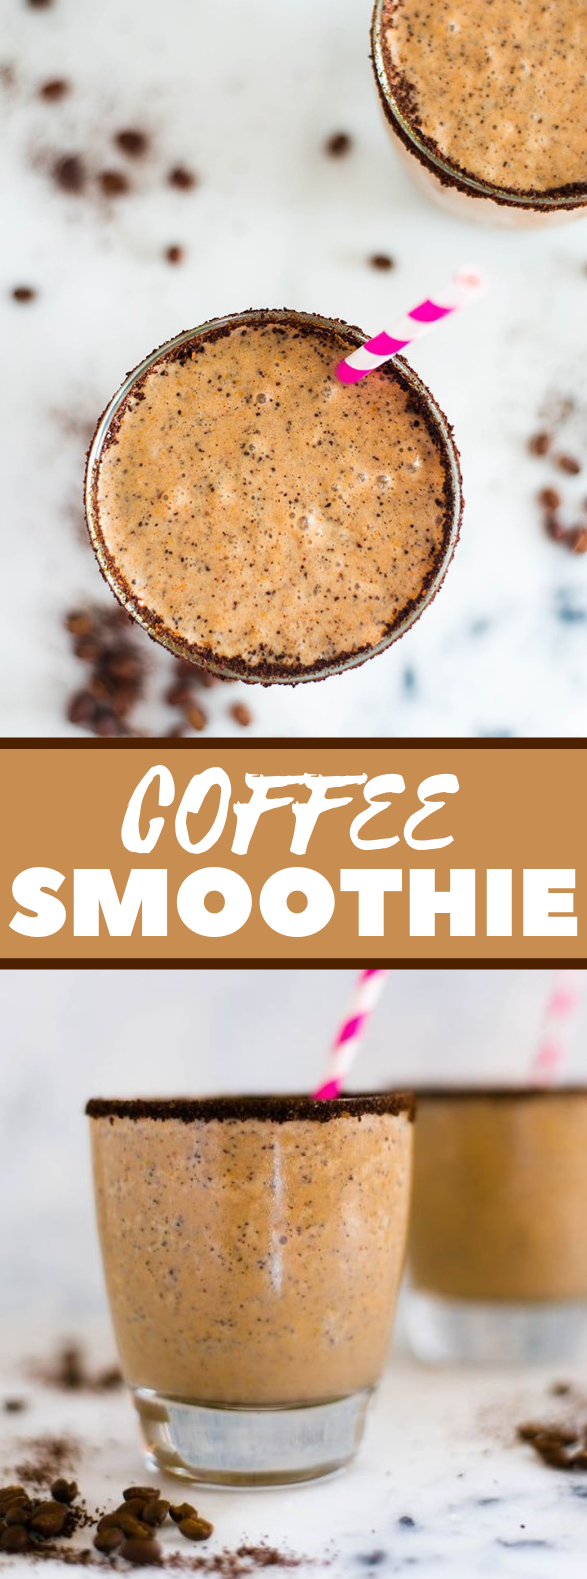 HEALTHY COFFEE SMOOTHIE RECIPE #drinks #smoothies